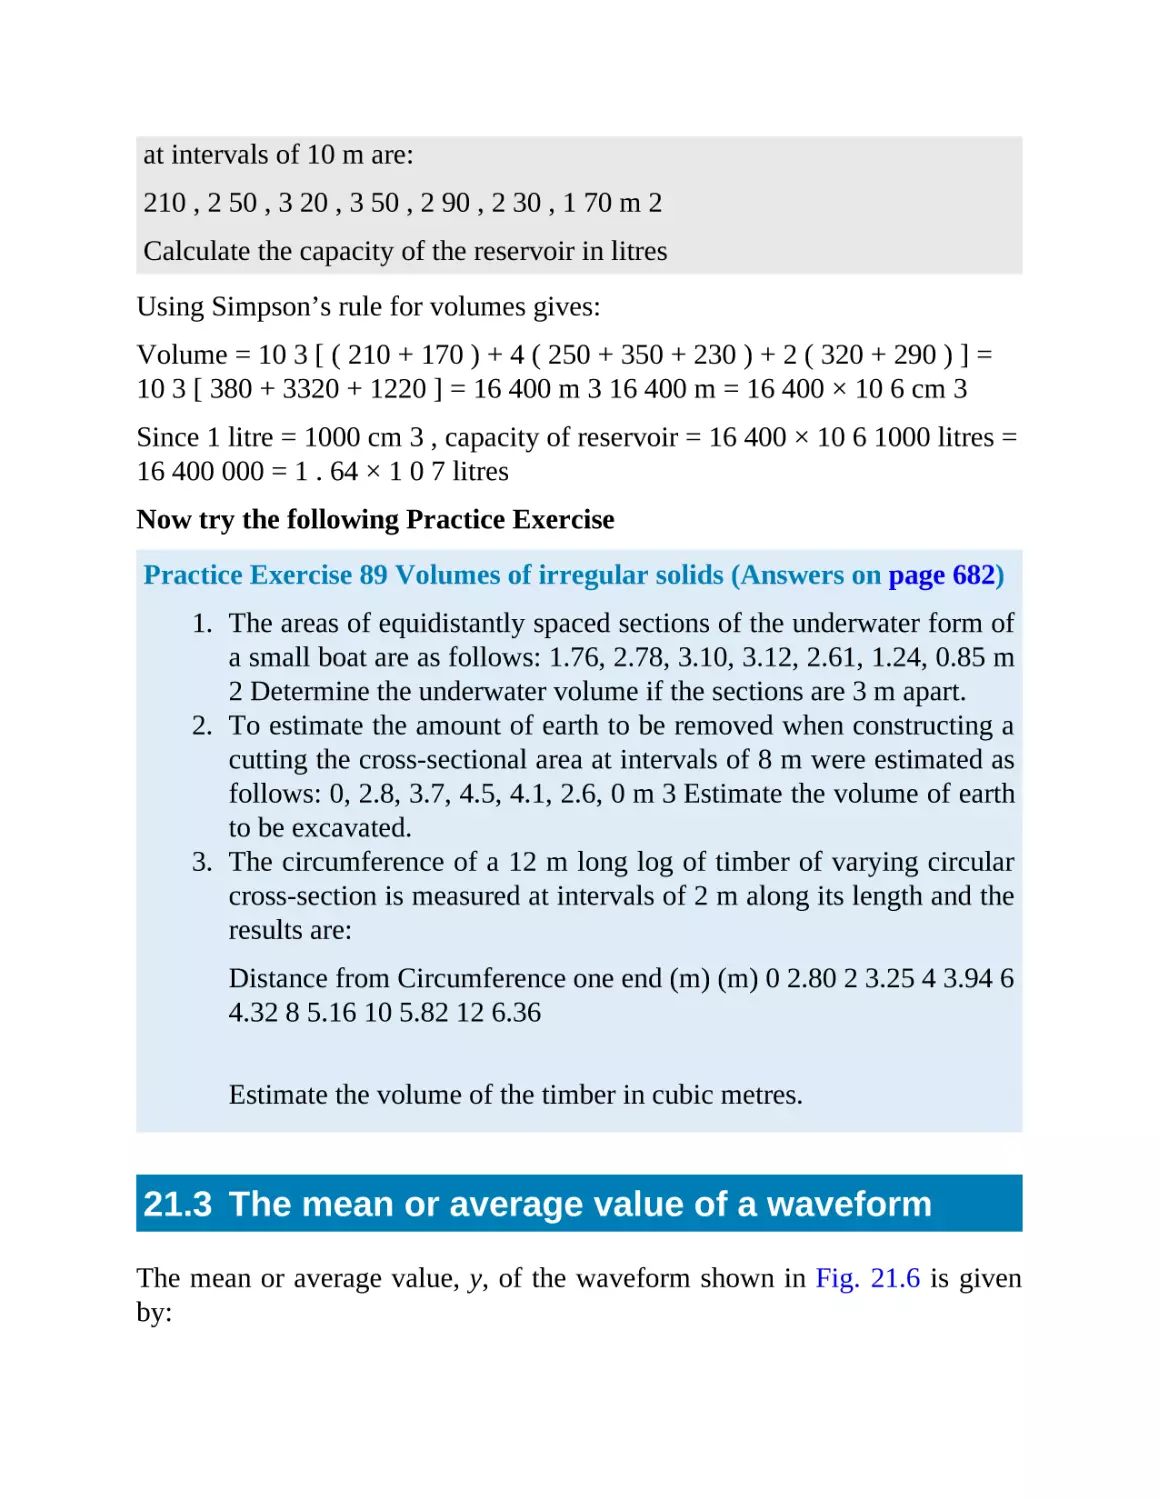 21.3 The mean or average value of a waveform